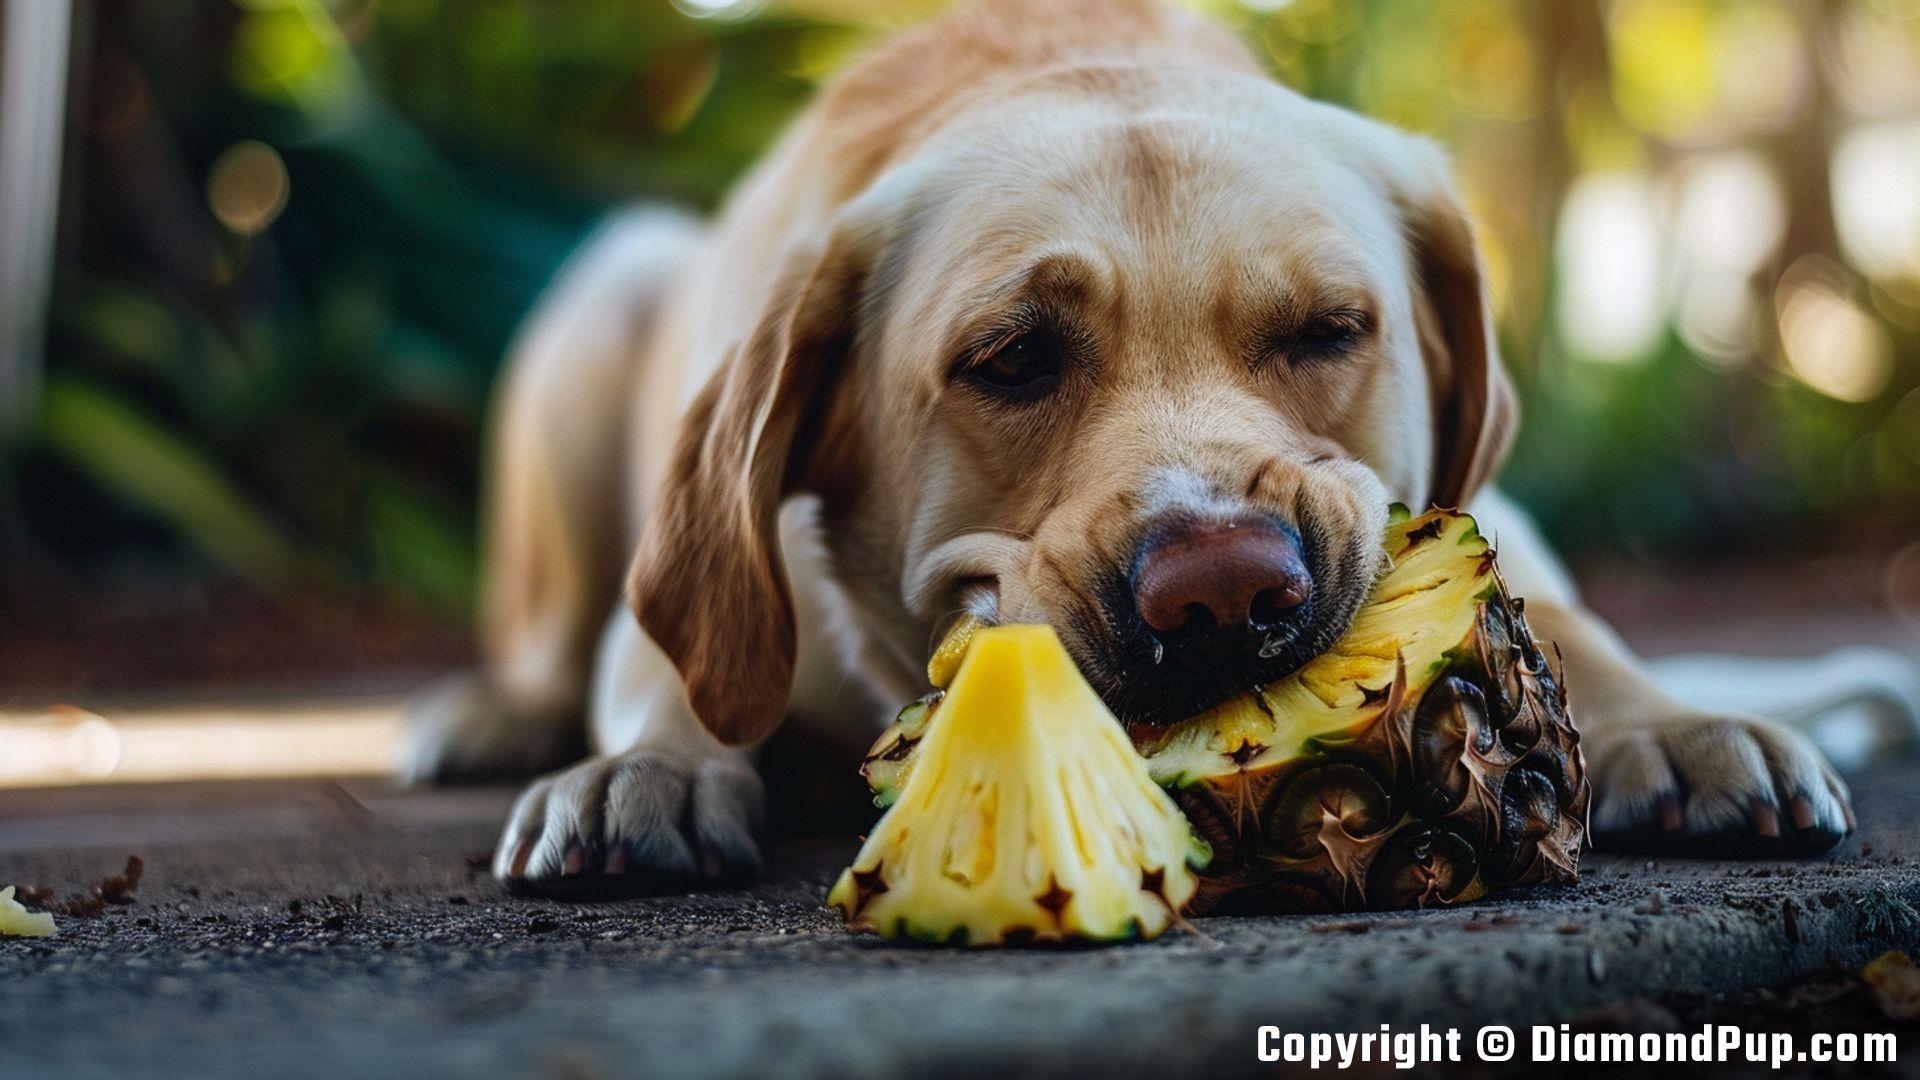 Photo of a Cute Labrador Eating Pineapple